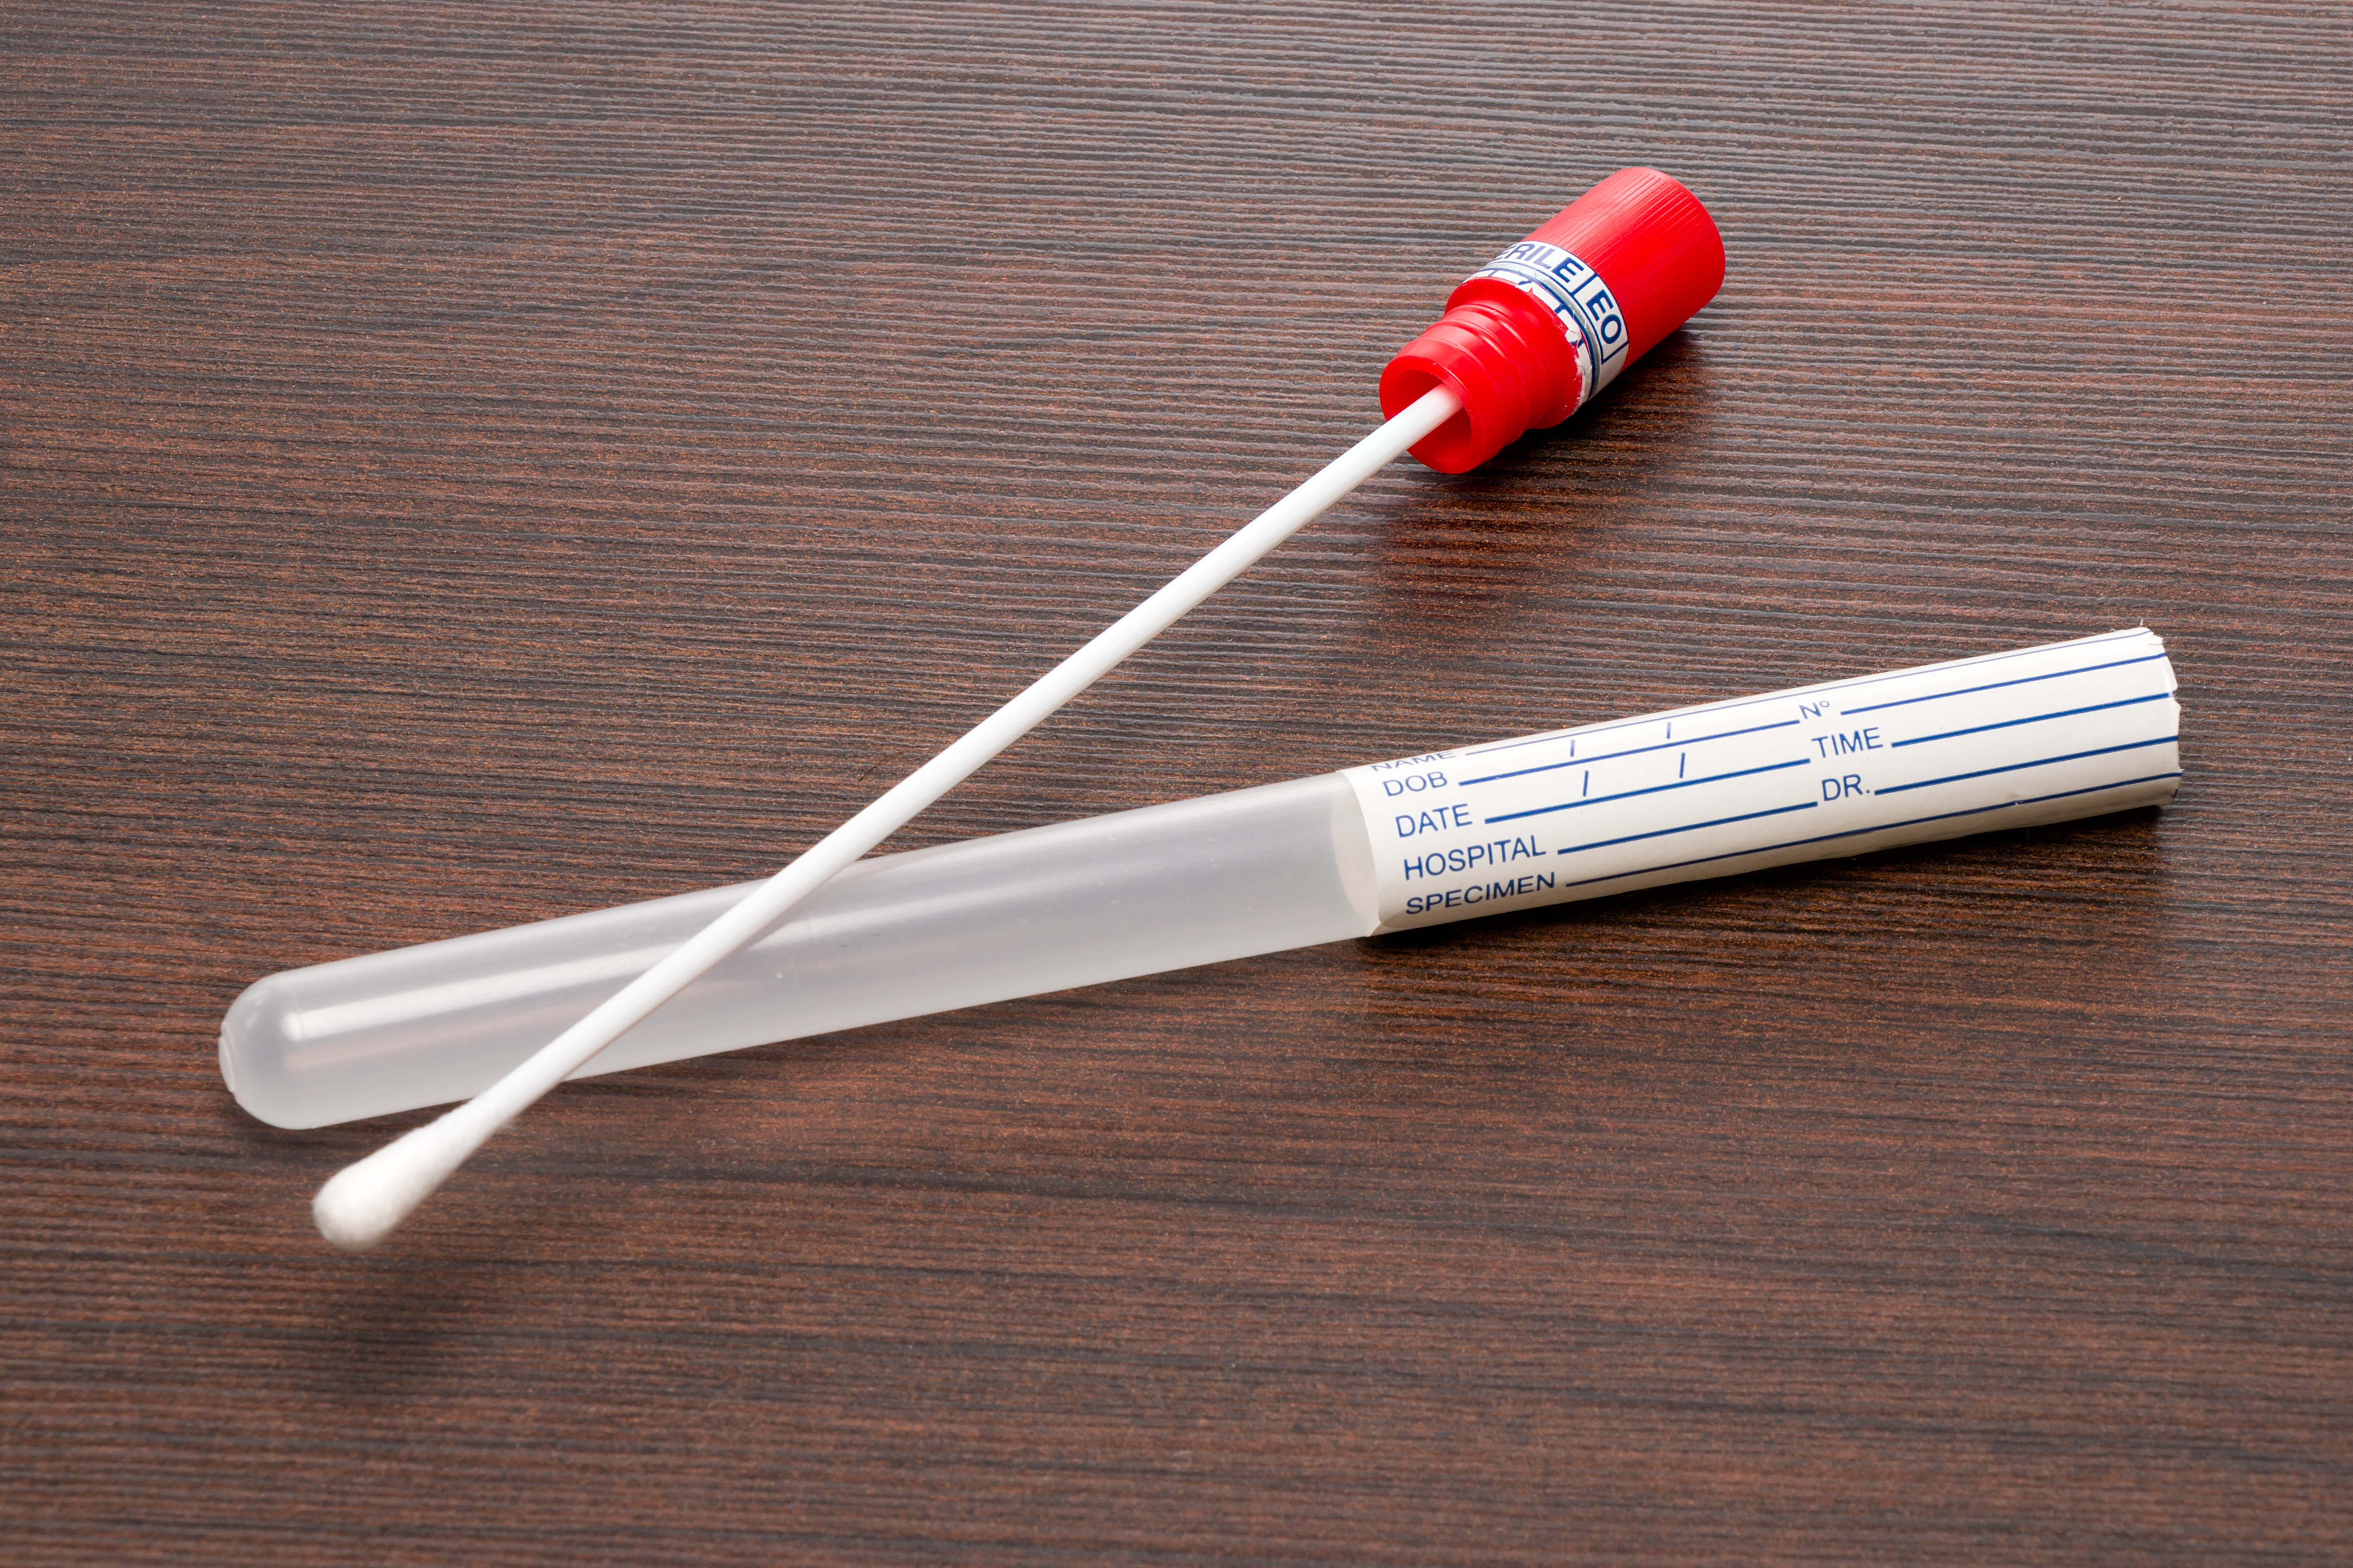 A DNA test tube and a cotton swab. | Source: Shutterstock